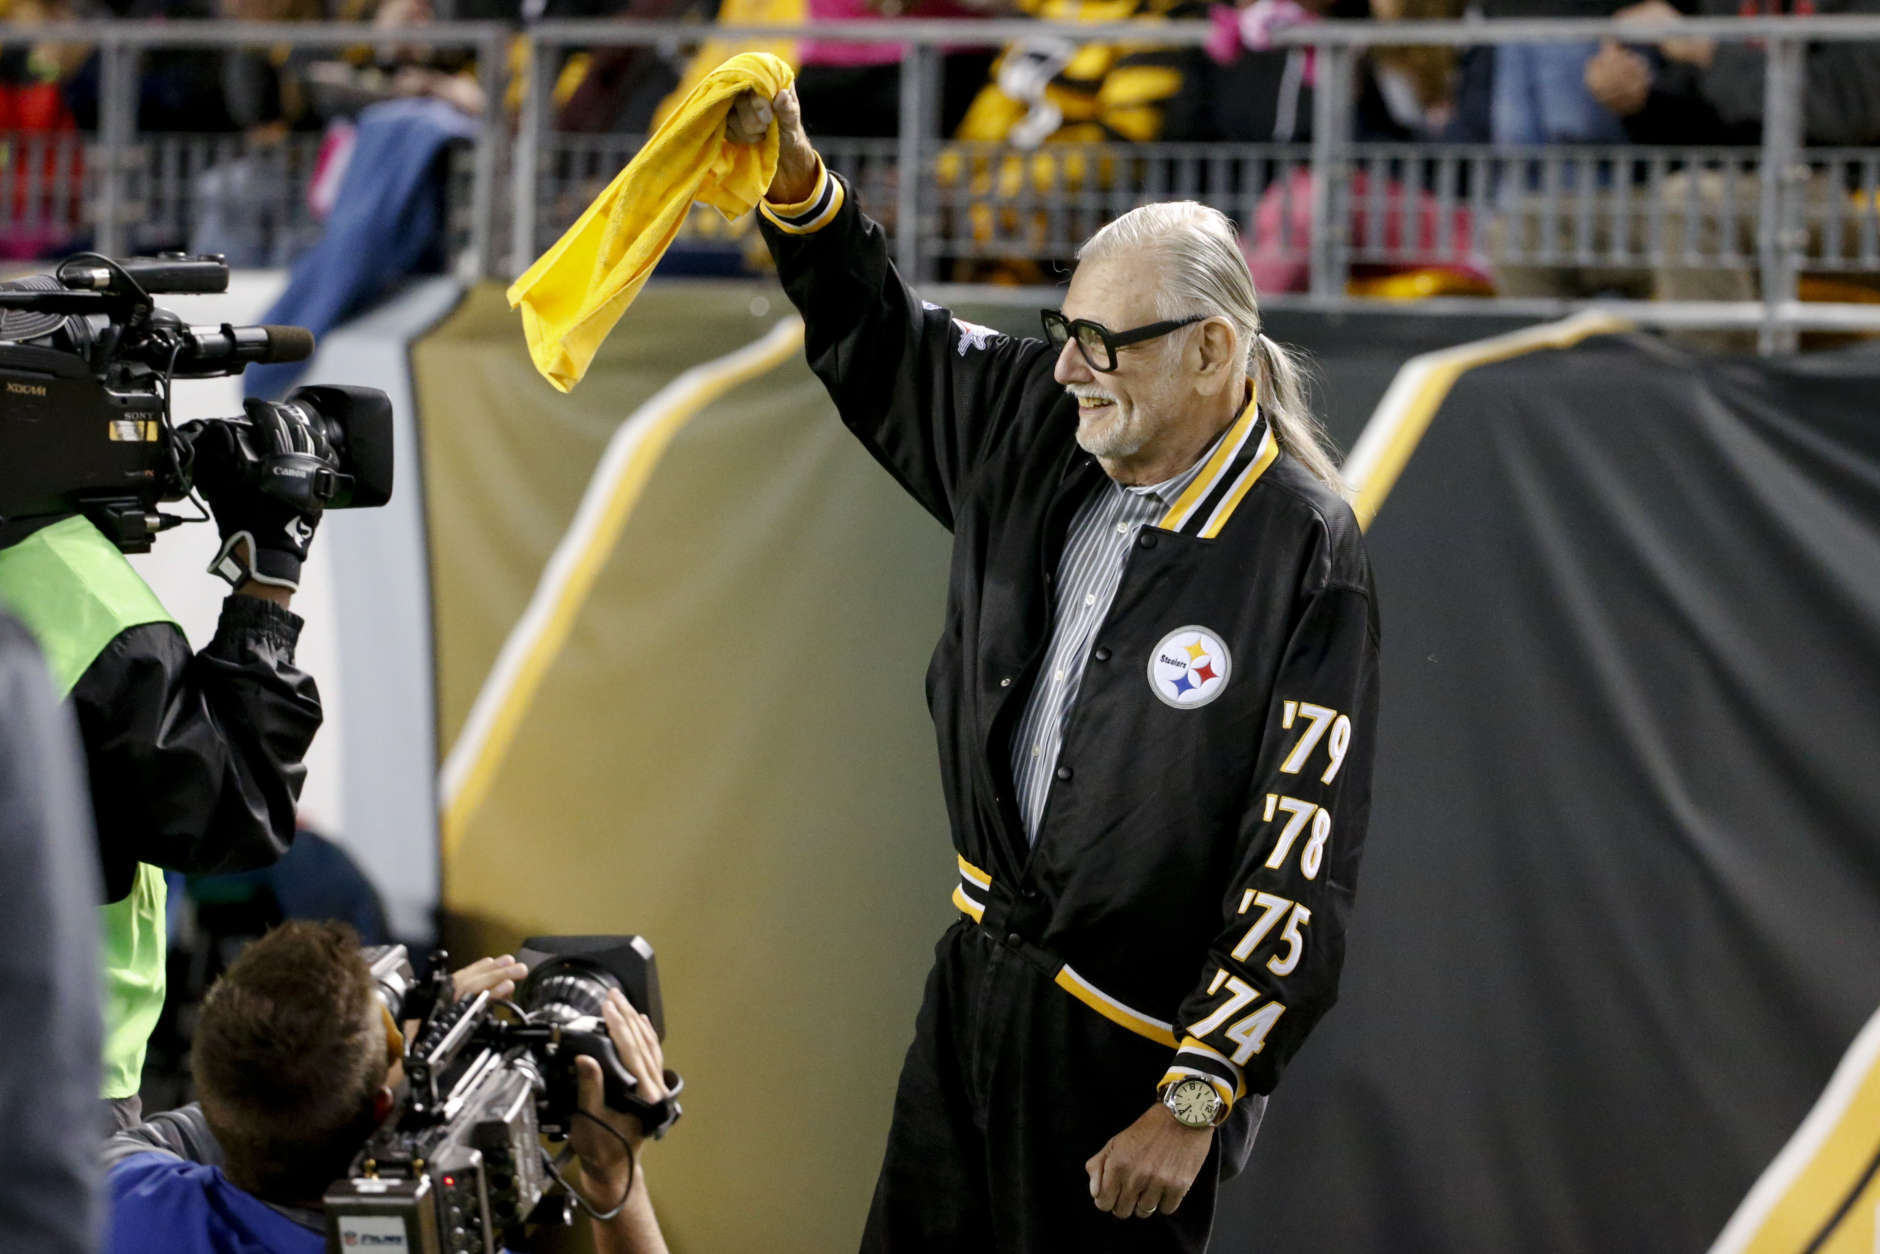 Horror film director George Romero, who directed "The Night of The Living Dead" waves a Terrible Towel before an NFL football game, Thursday, Oct. 1, 2015 in Pittsburgh. It was the anniversary of the film that was made in the Pittsburgh area. (AP Photo/Gene J. Puskar)